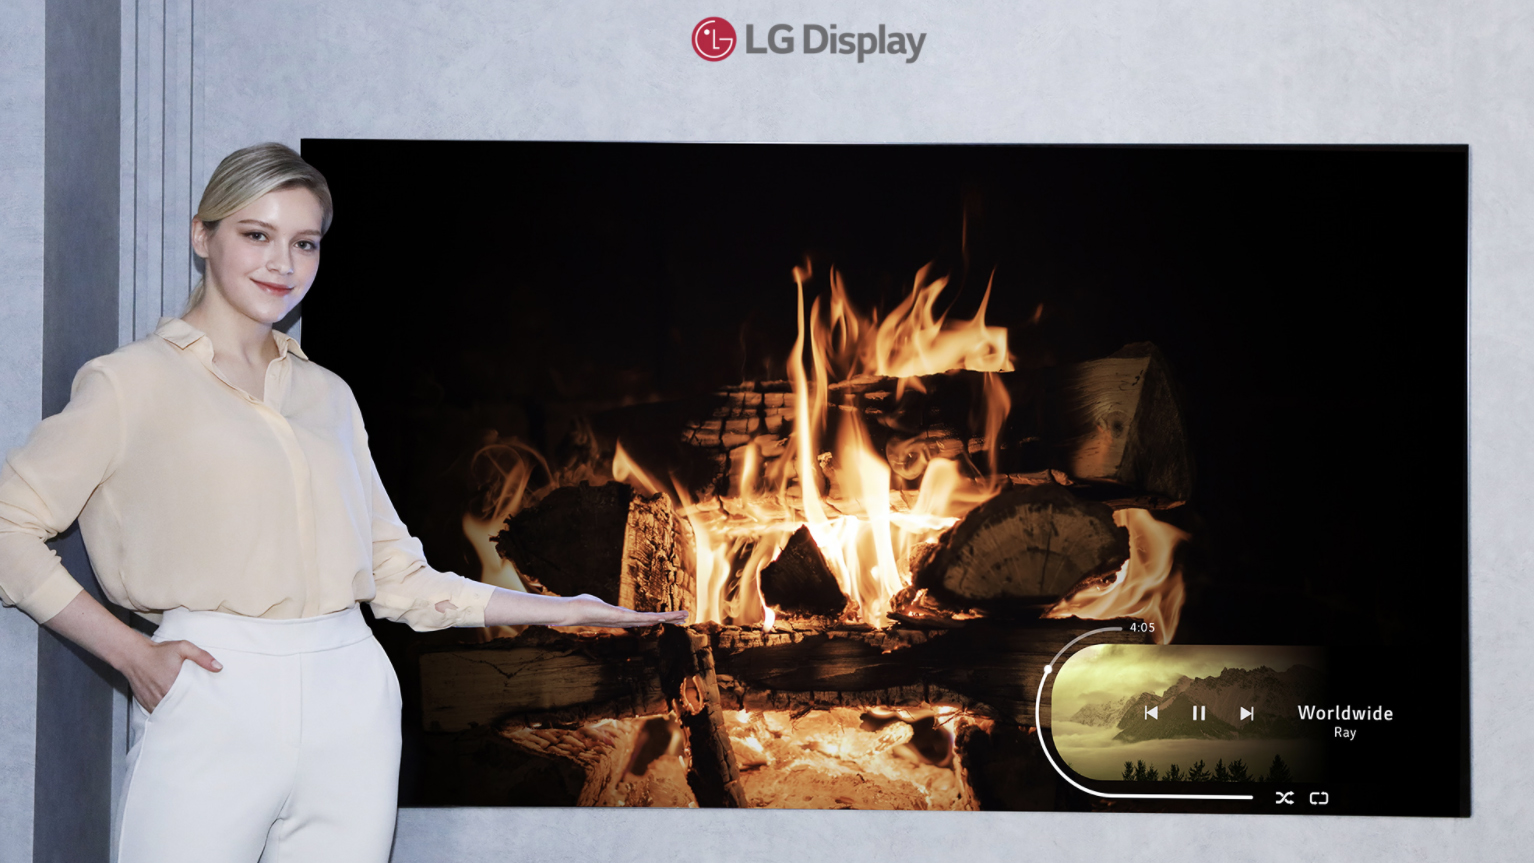 lg-display-announces-its-smallest-oled-tv-panel-to-date